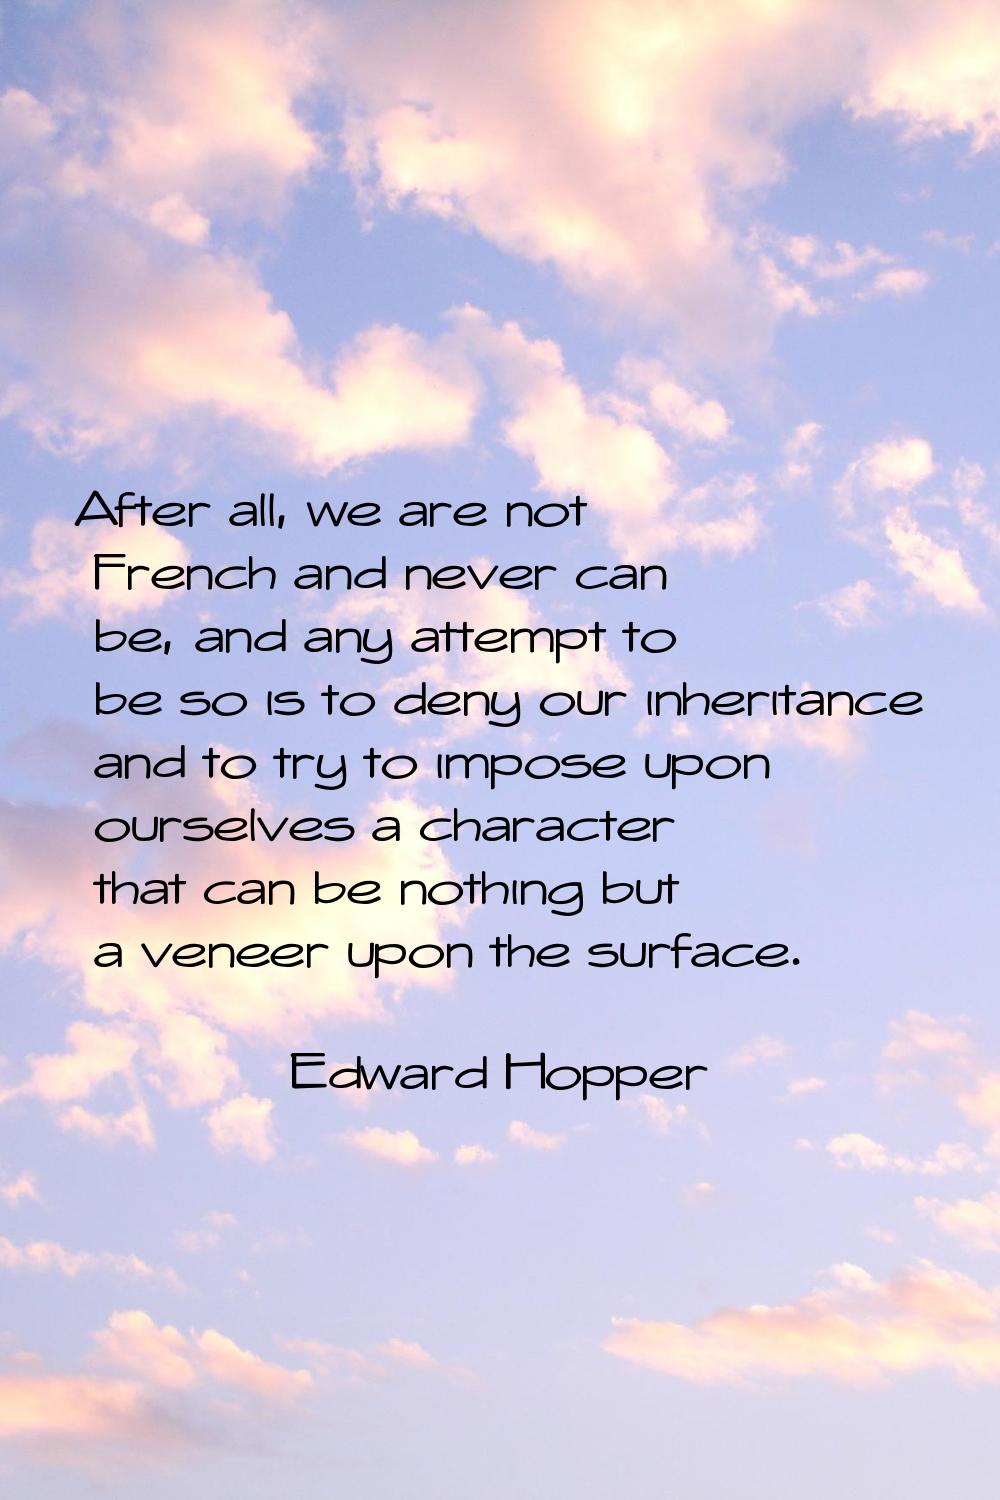 After all, we are not French and never can be, and any attempt to be so is to deny our inheritance 